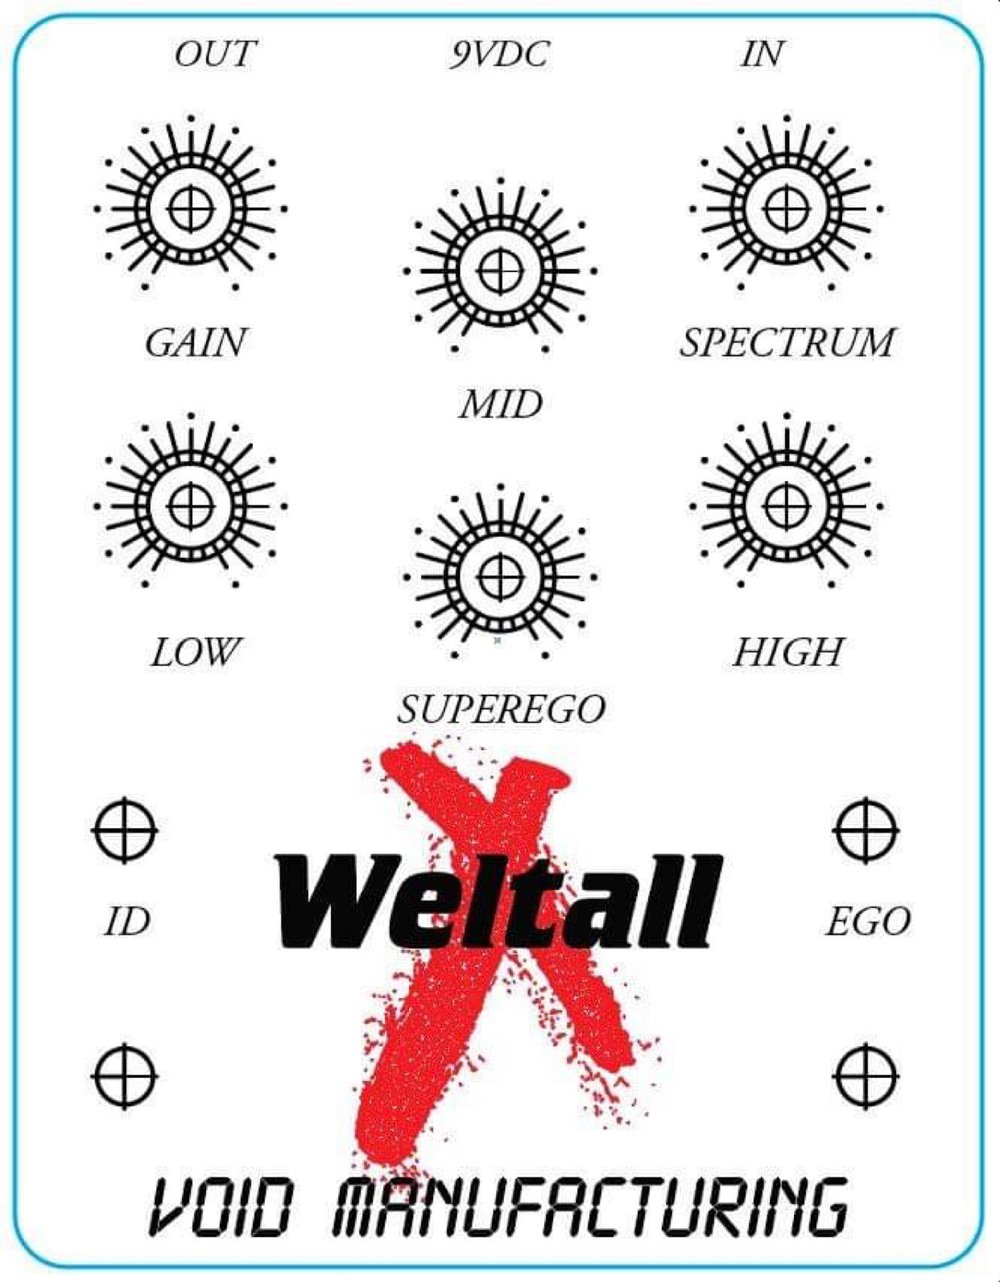 Weltall  V2 Variable universal parametric overdrive pre sale